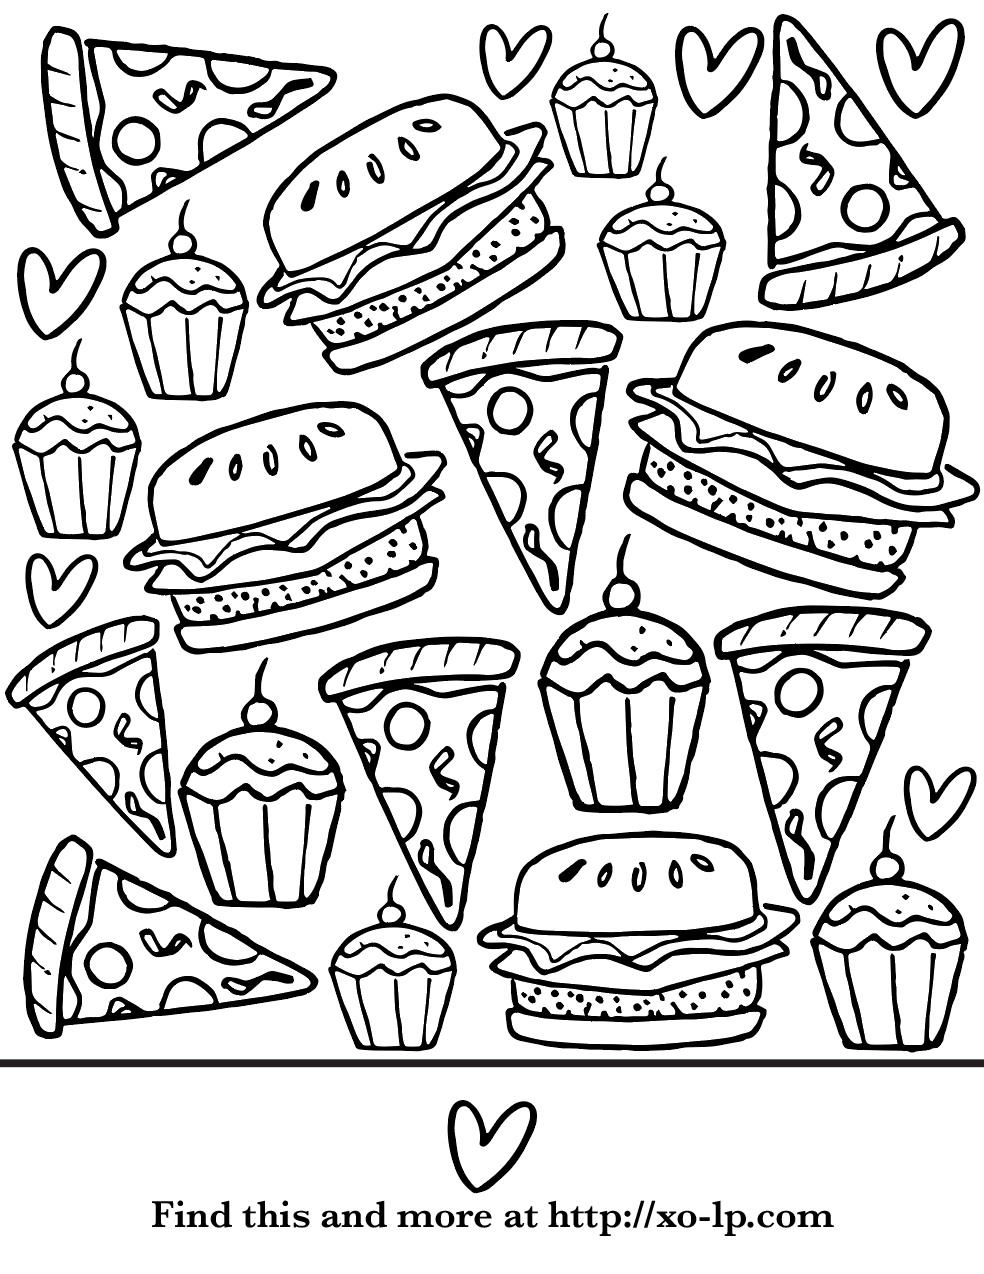 Junk food coloring page food coloring pages cute coloring pages coloring pages